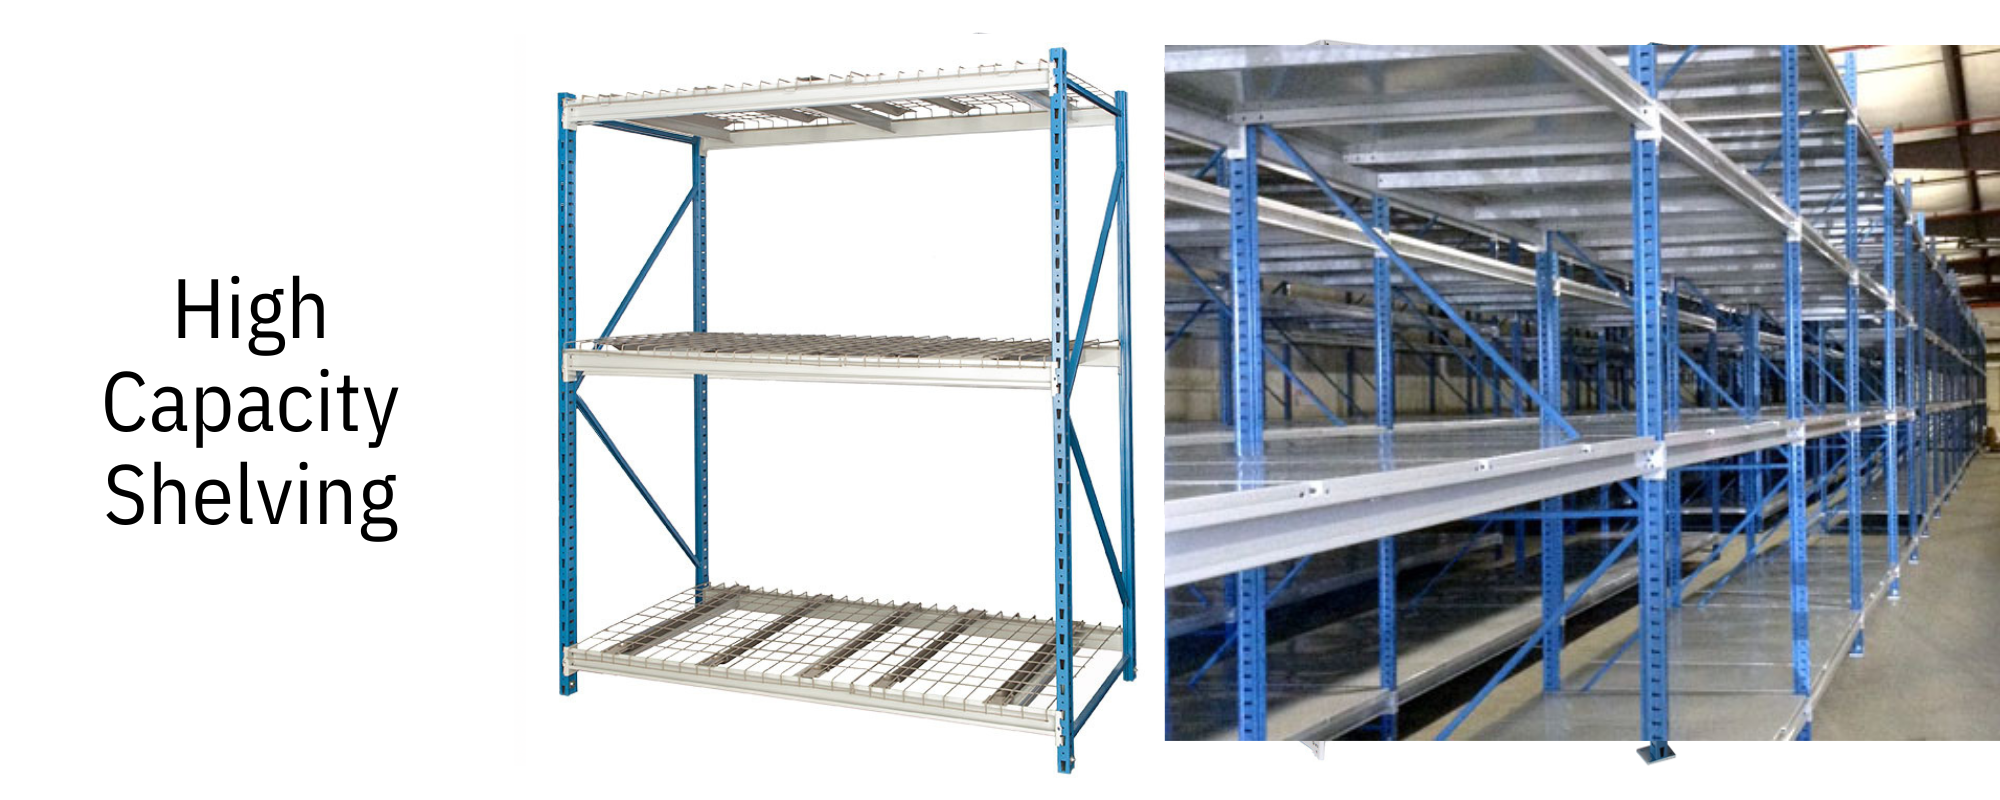 Keep your warehouse safe and running efficiently with Store Displays' Warehouse Solutions and Accessories. From safety equipment to parking blocks, speed bumps, and high capacity shelving -